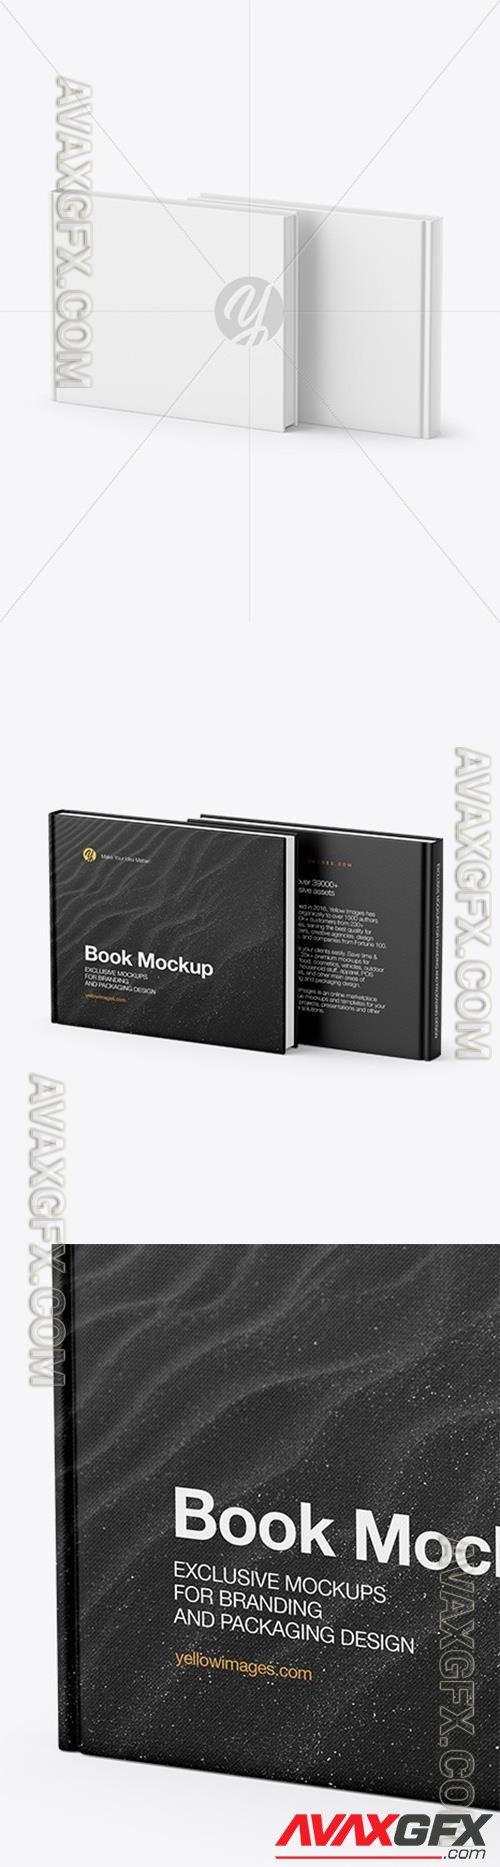 Hardcover Books with Textured Cover Mockup 94150 TIF